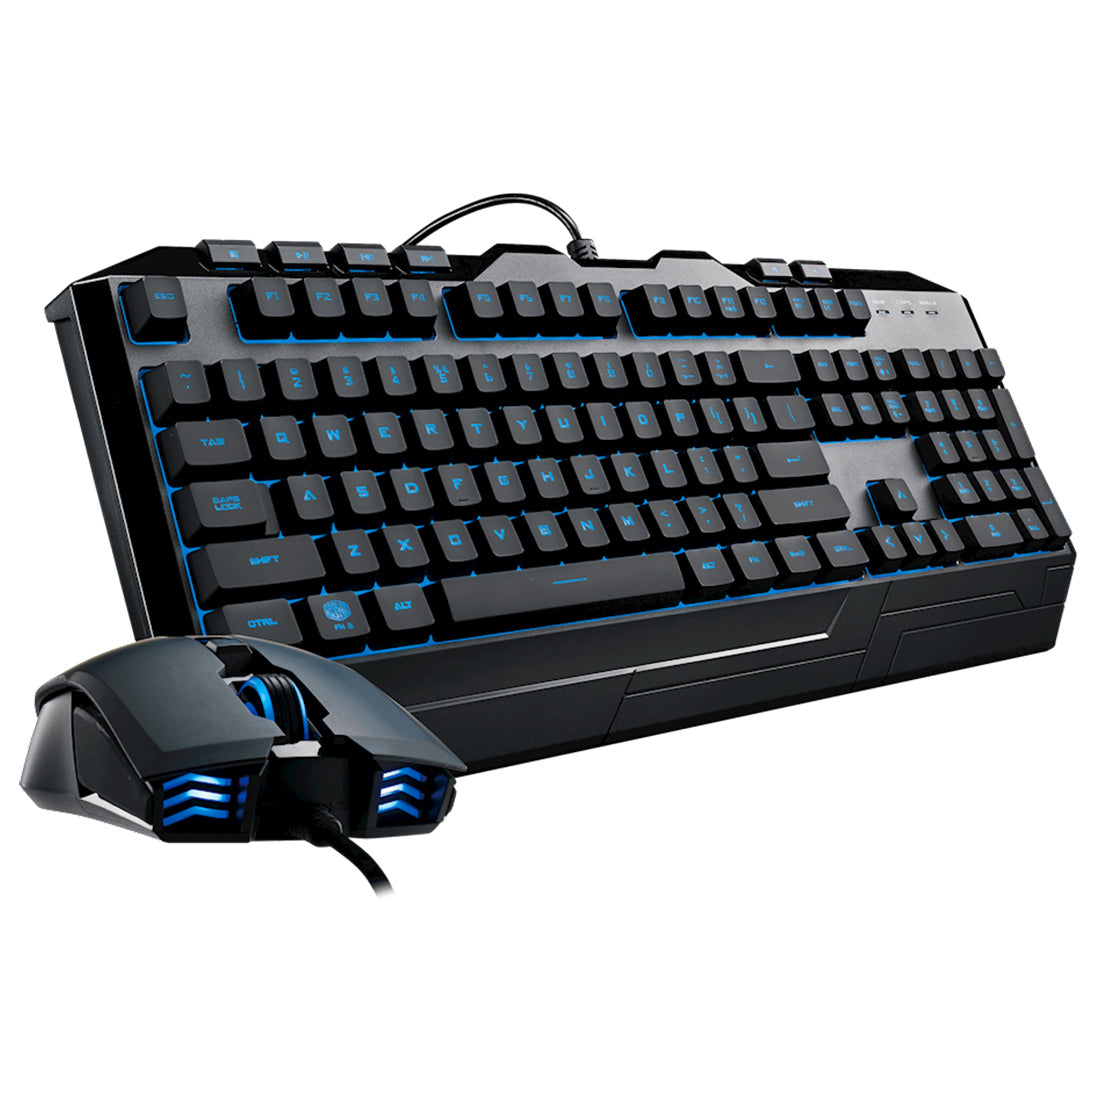 [RePacked]Cooler Master Devastator 3 Gaming Keyboard and Mouse Combo